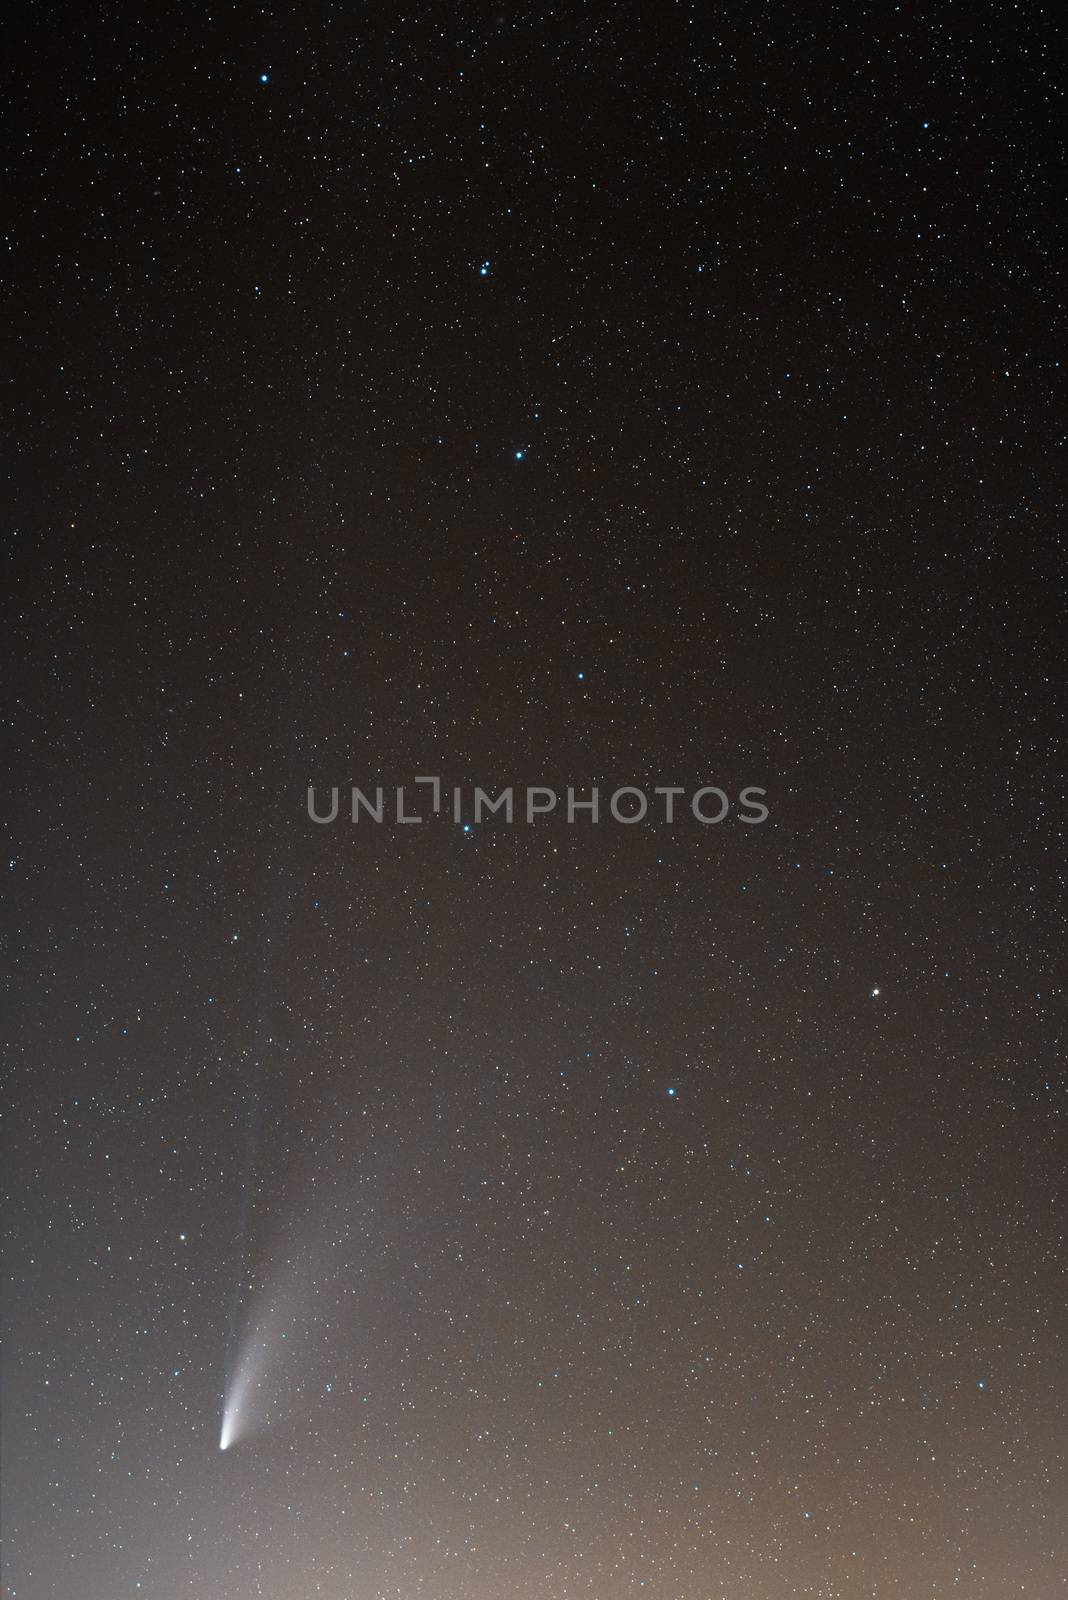 Neowise Comet and its two long tails below Ursa Major constellation. 35mm lens and photo stacking. Sicily, Italy